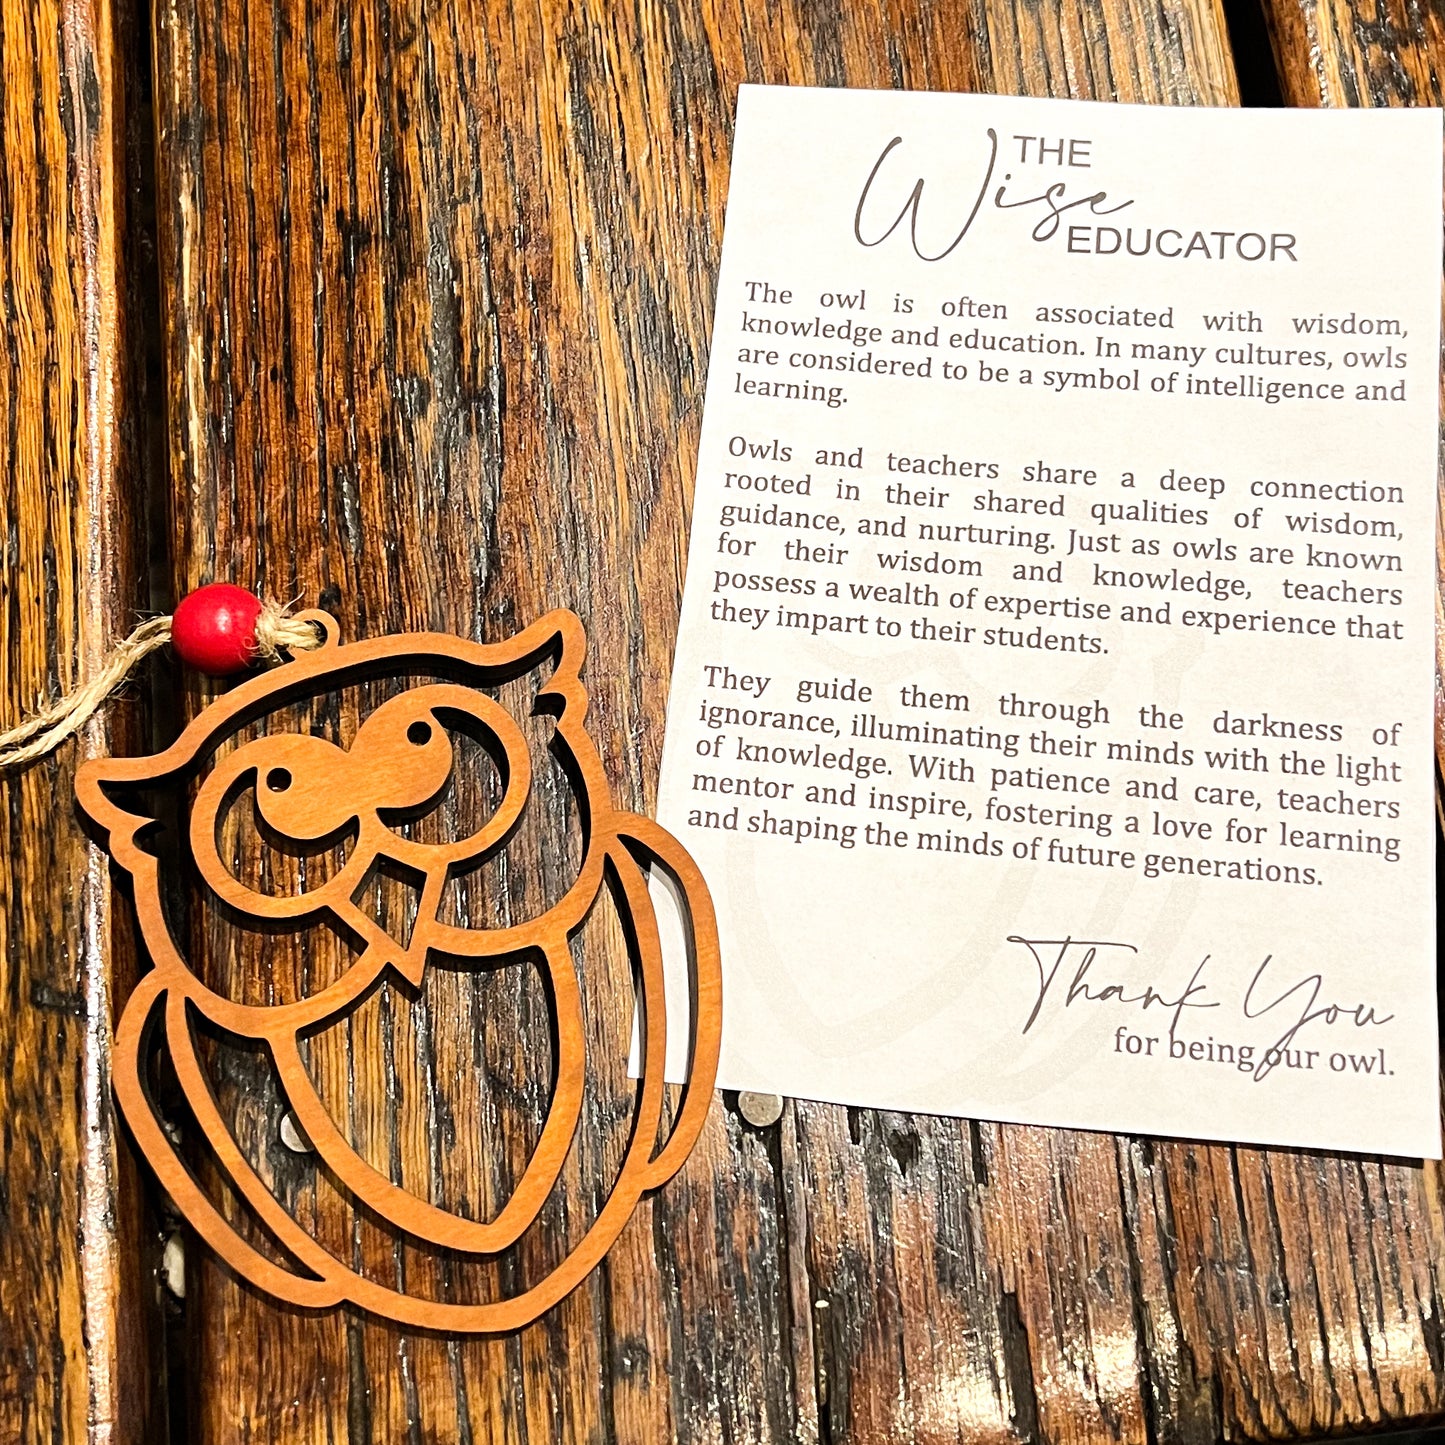 Story of the Wise Educator Ornament